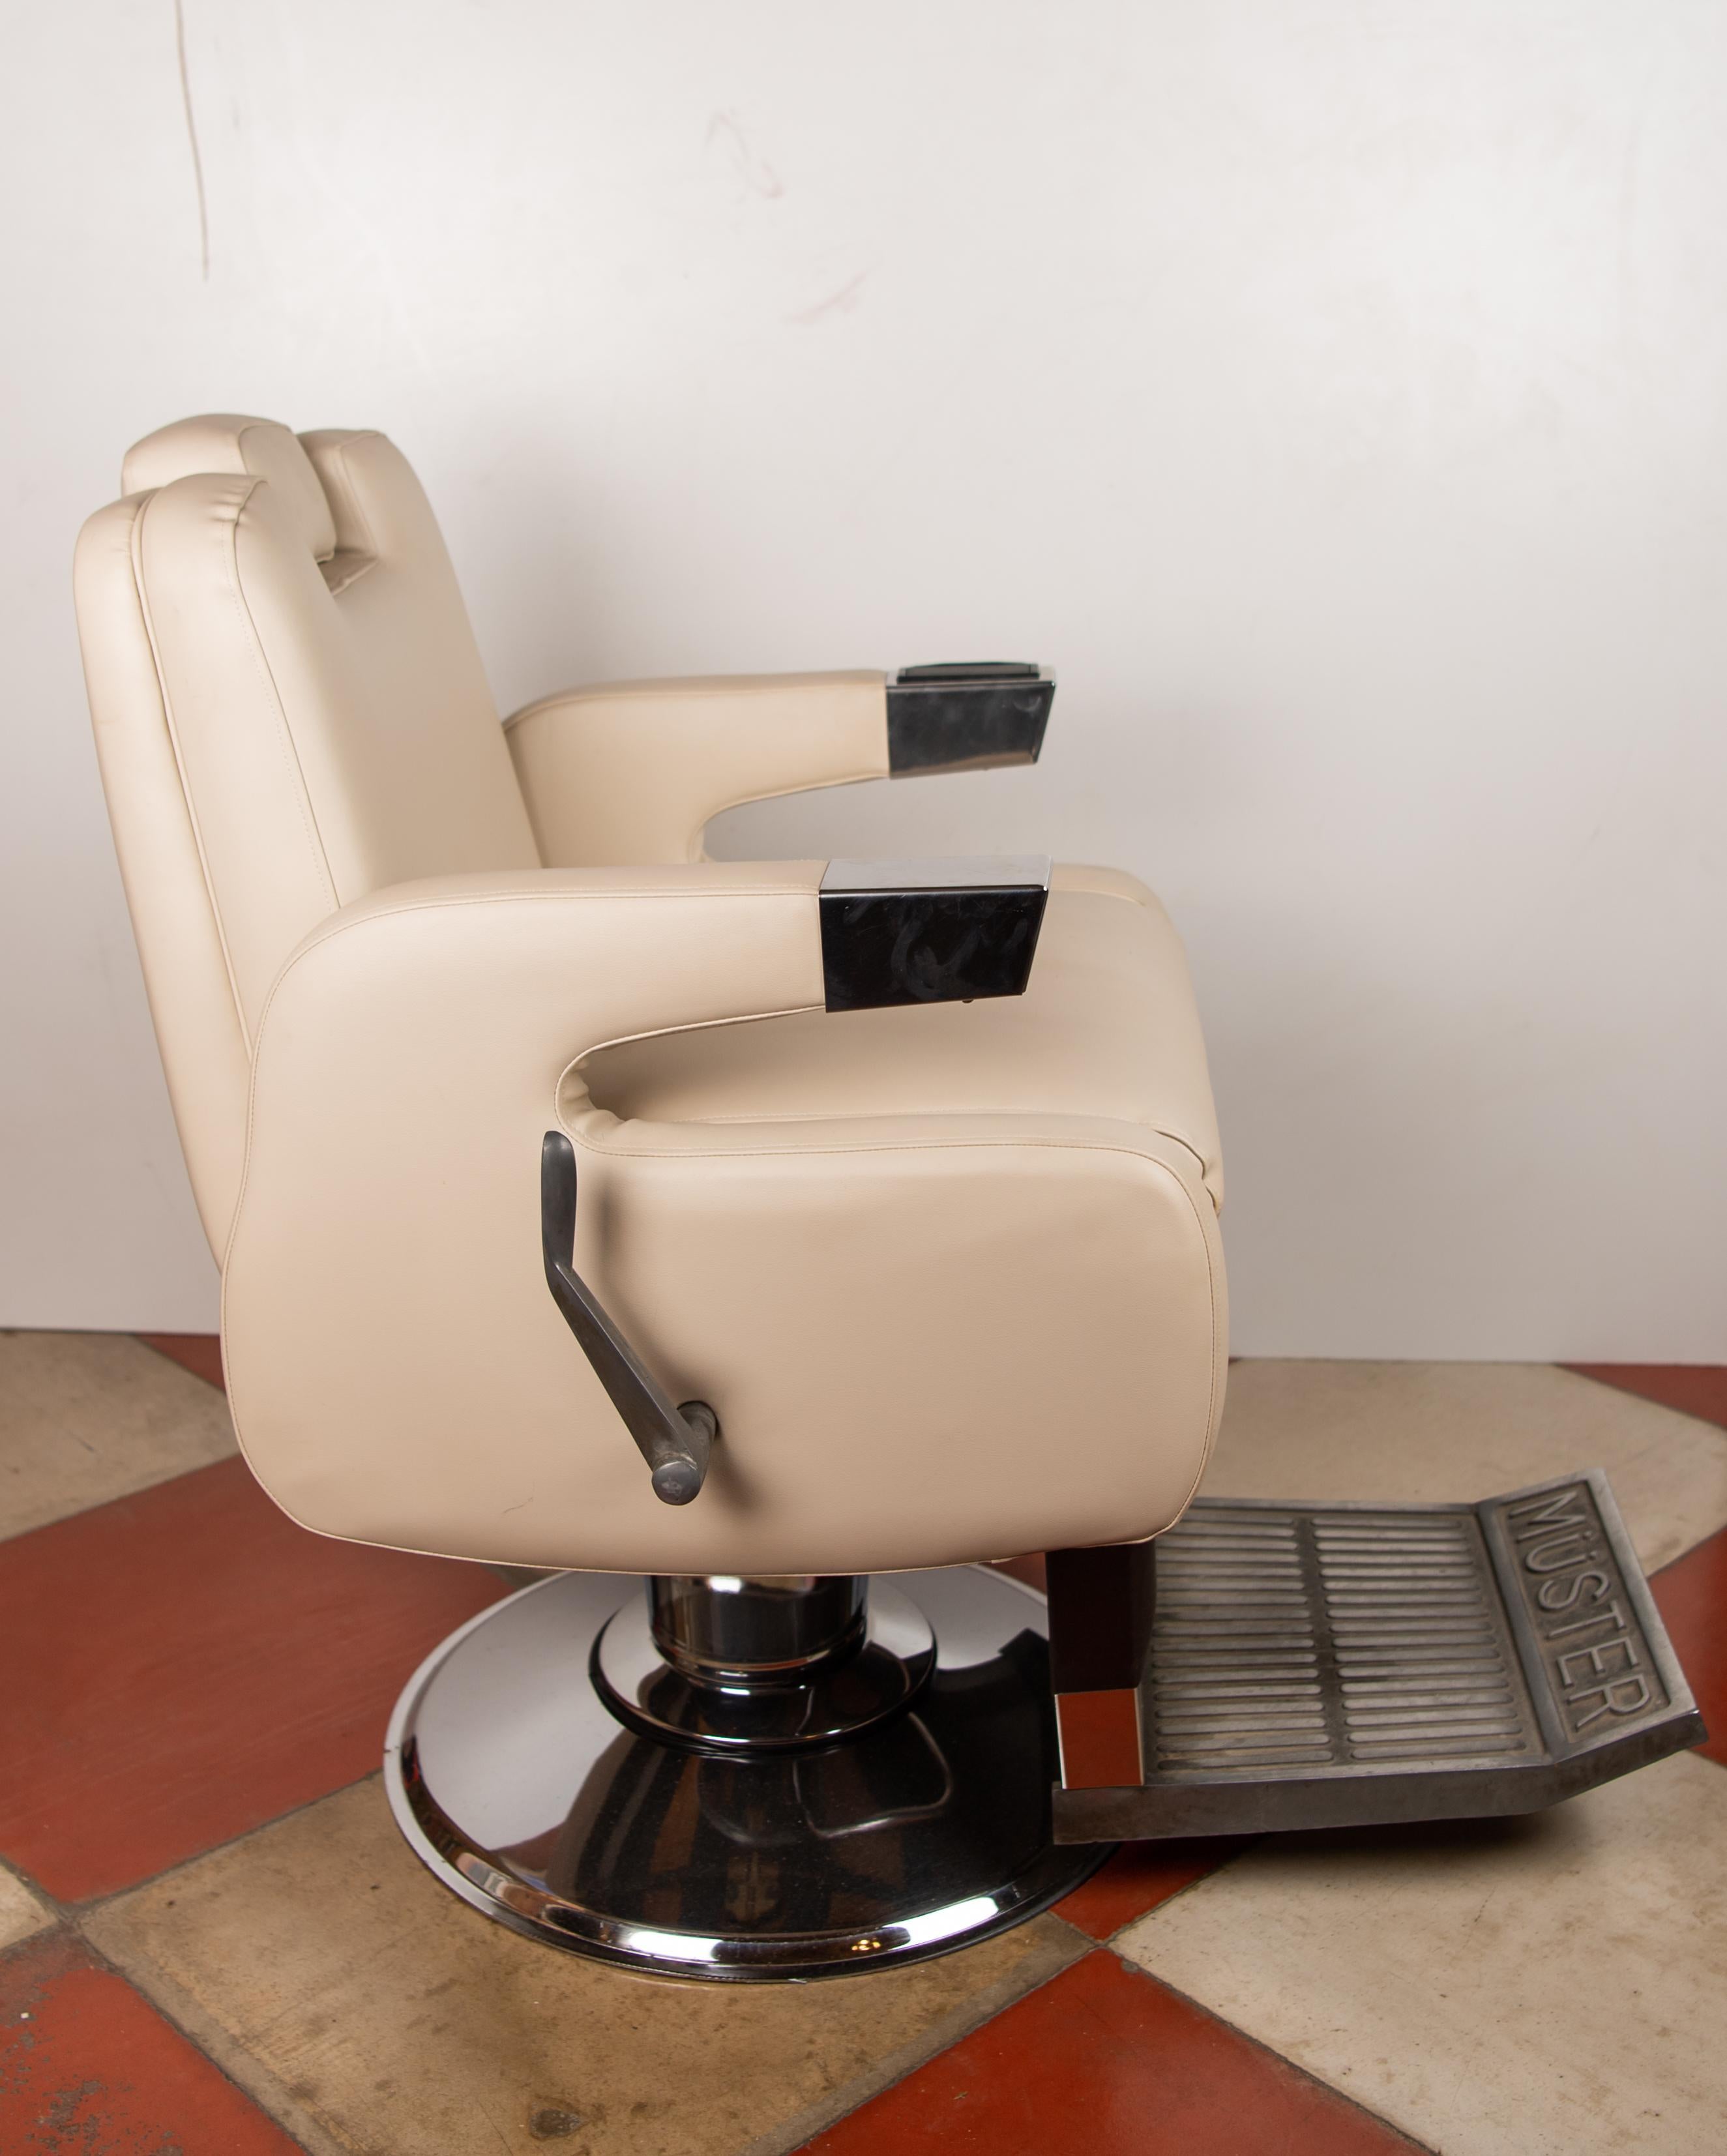 Very rare barber adjustable armchair with beige and brown faux leather cover and steel and chromed structure. Item has been restored with brand new leatherette cover, and cleaned and polished chroemd parts. Typical barber shop item from the 1960s